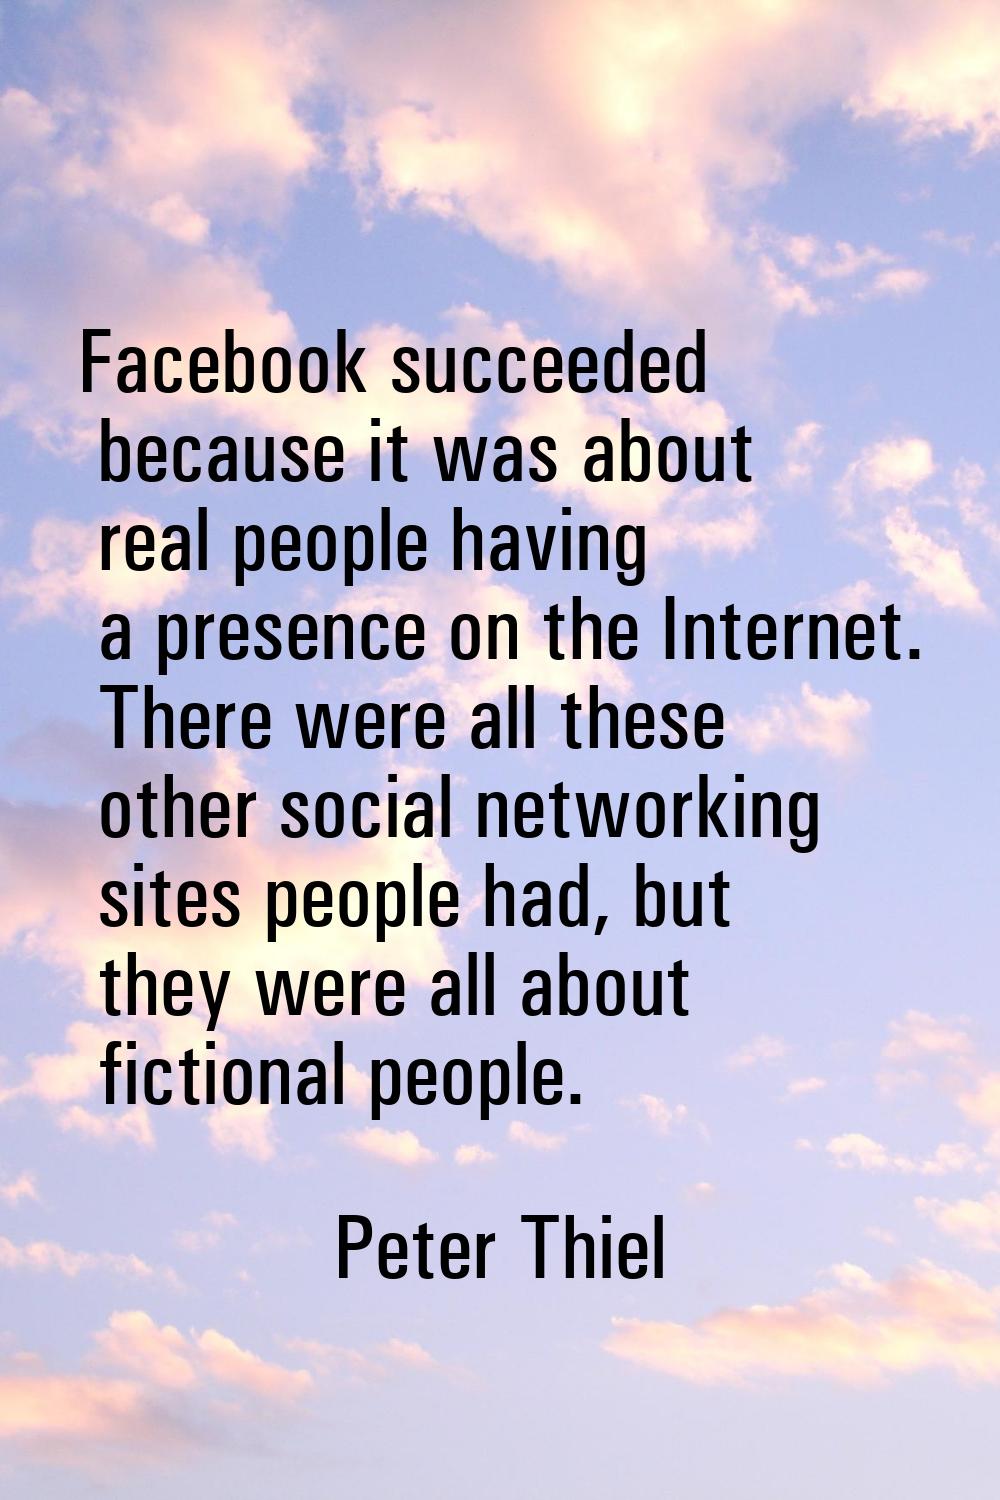 Facebook succeeded because it was about real people having a presence on the Internet. There were a